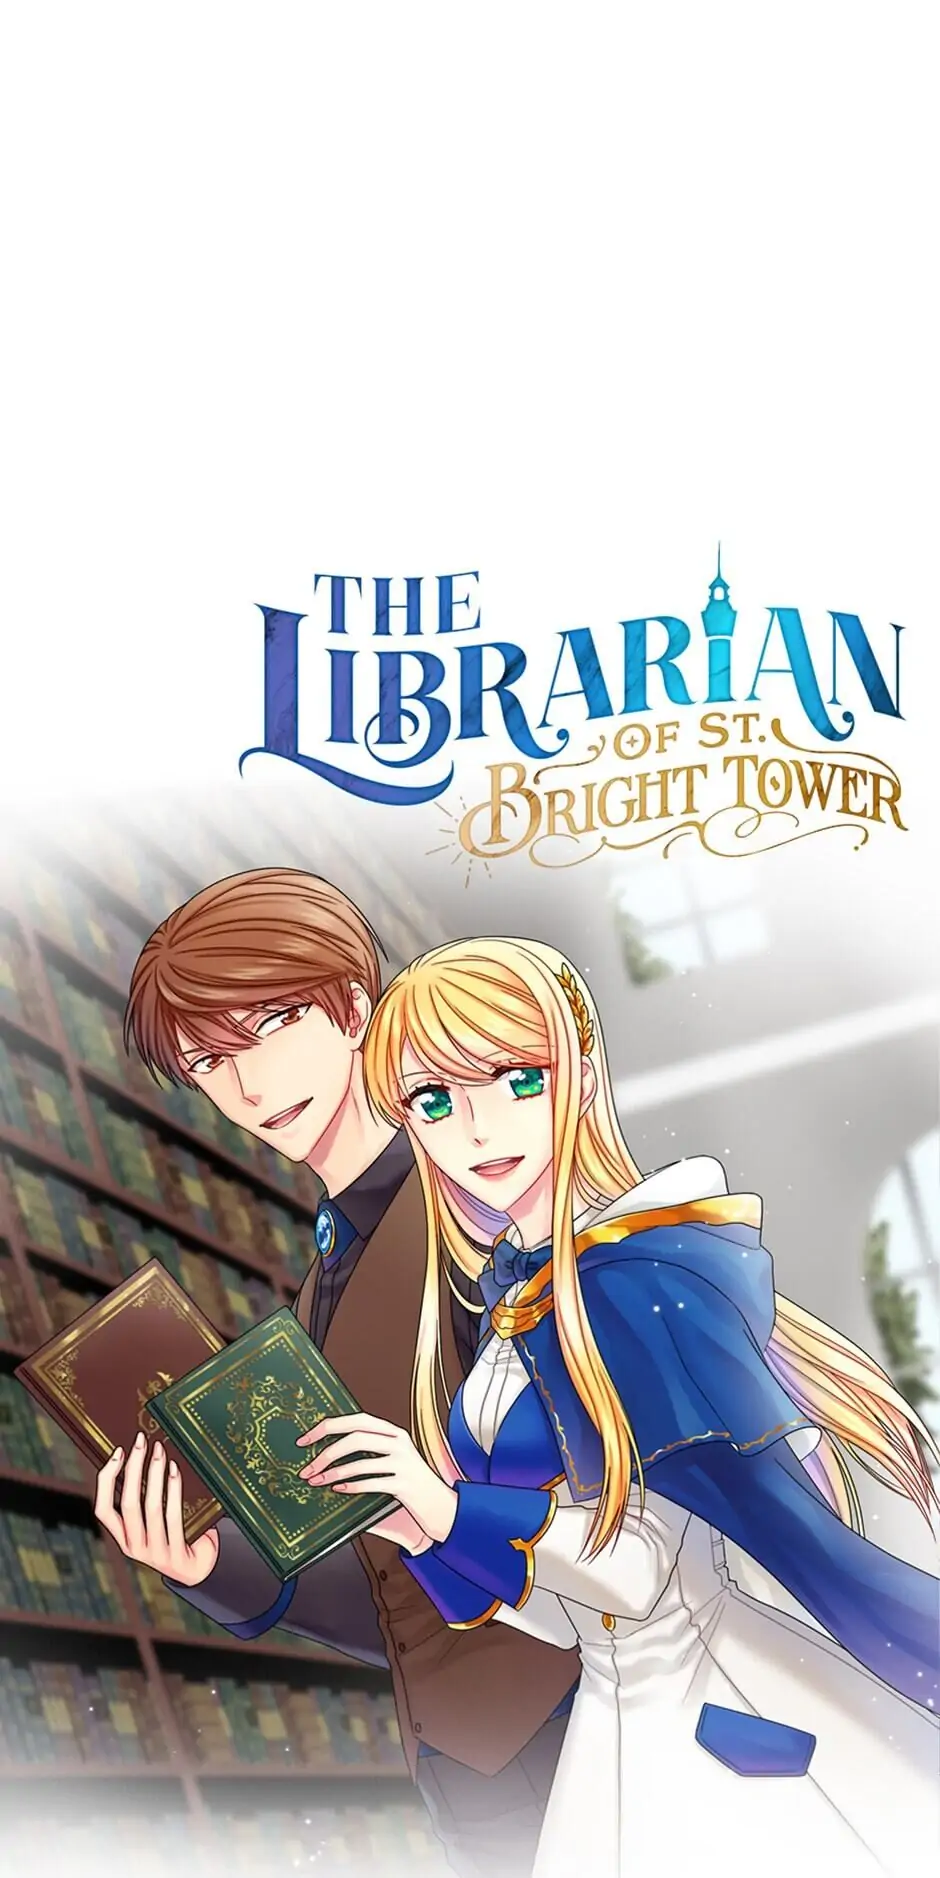 The Magic Tower Librarian chapter 13